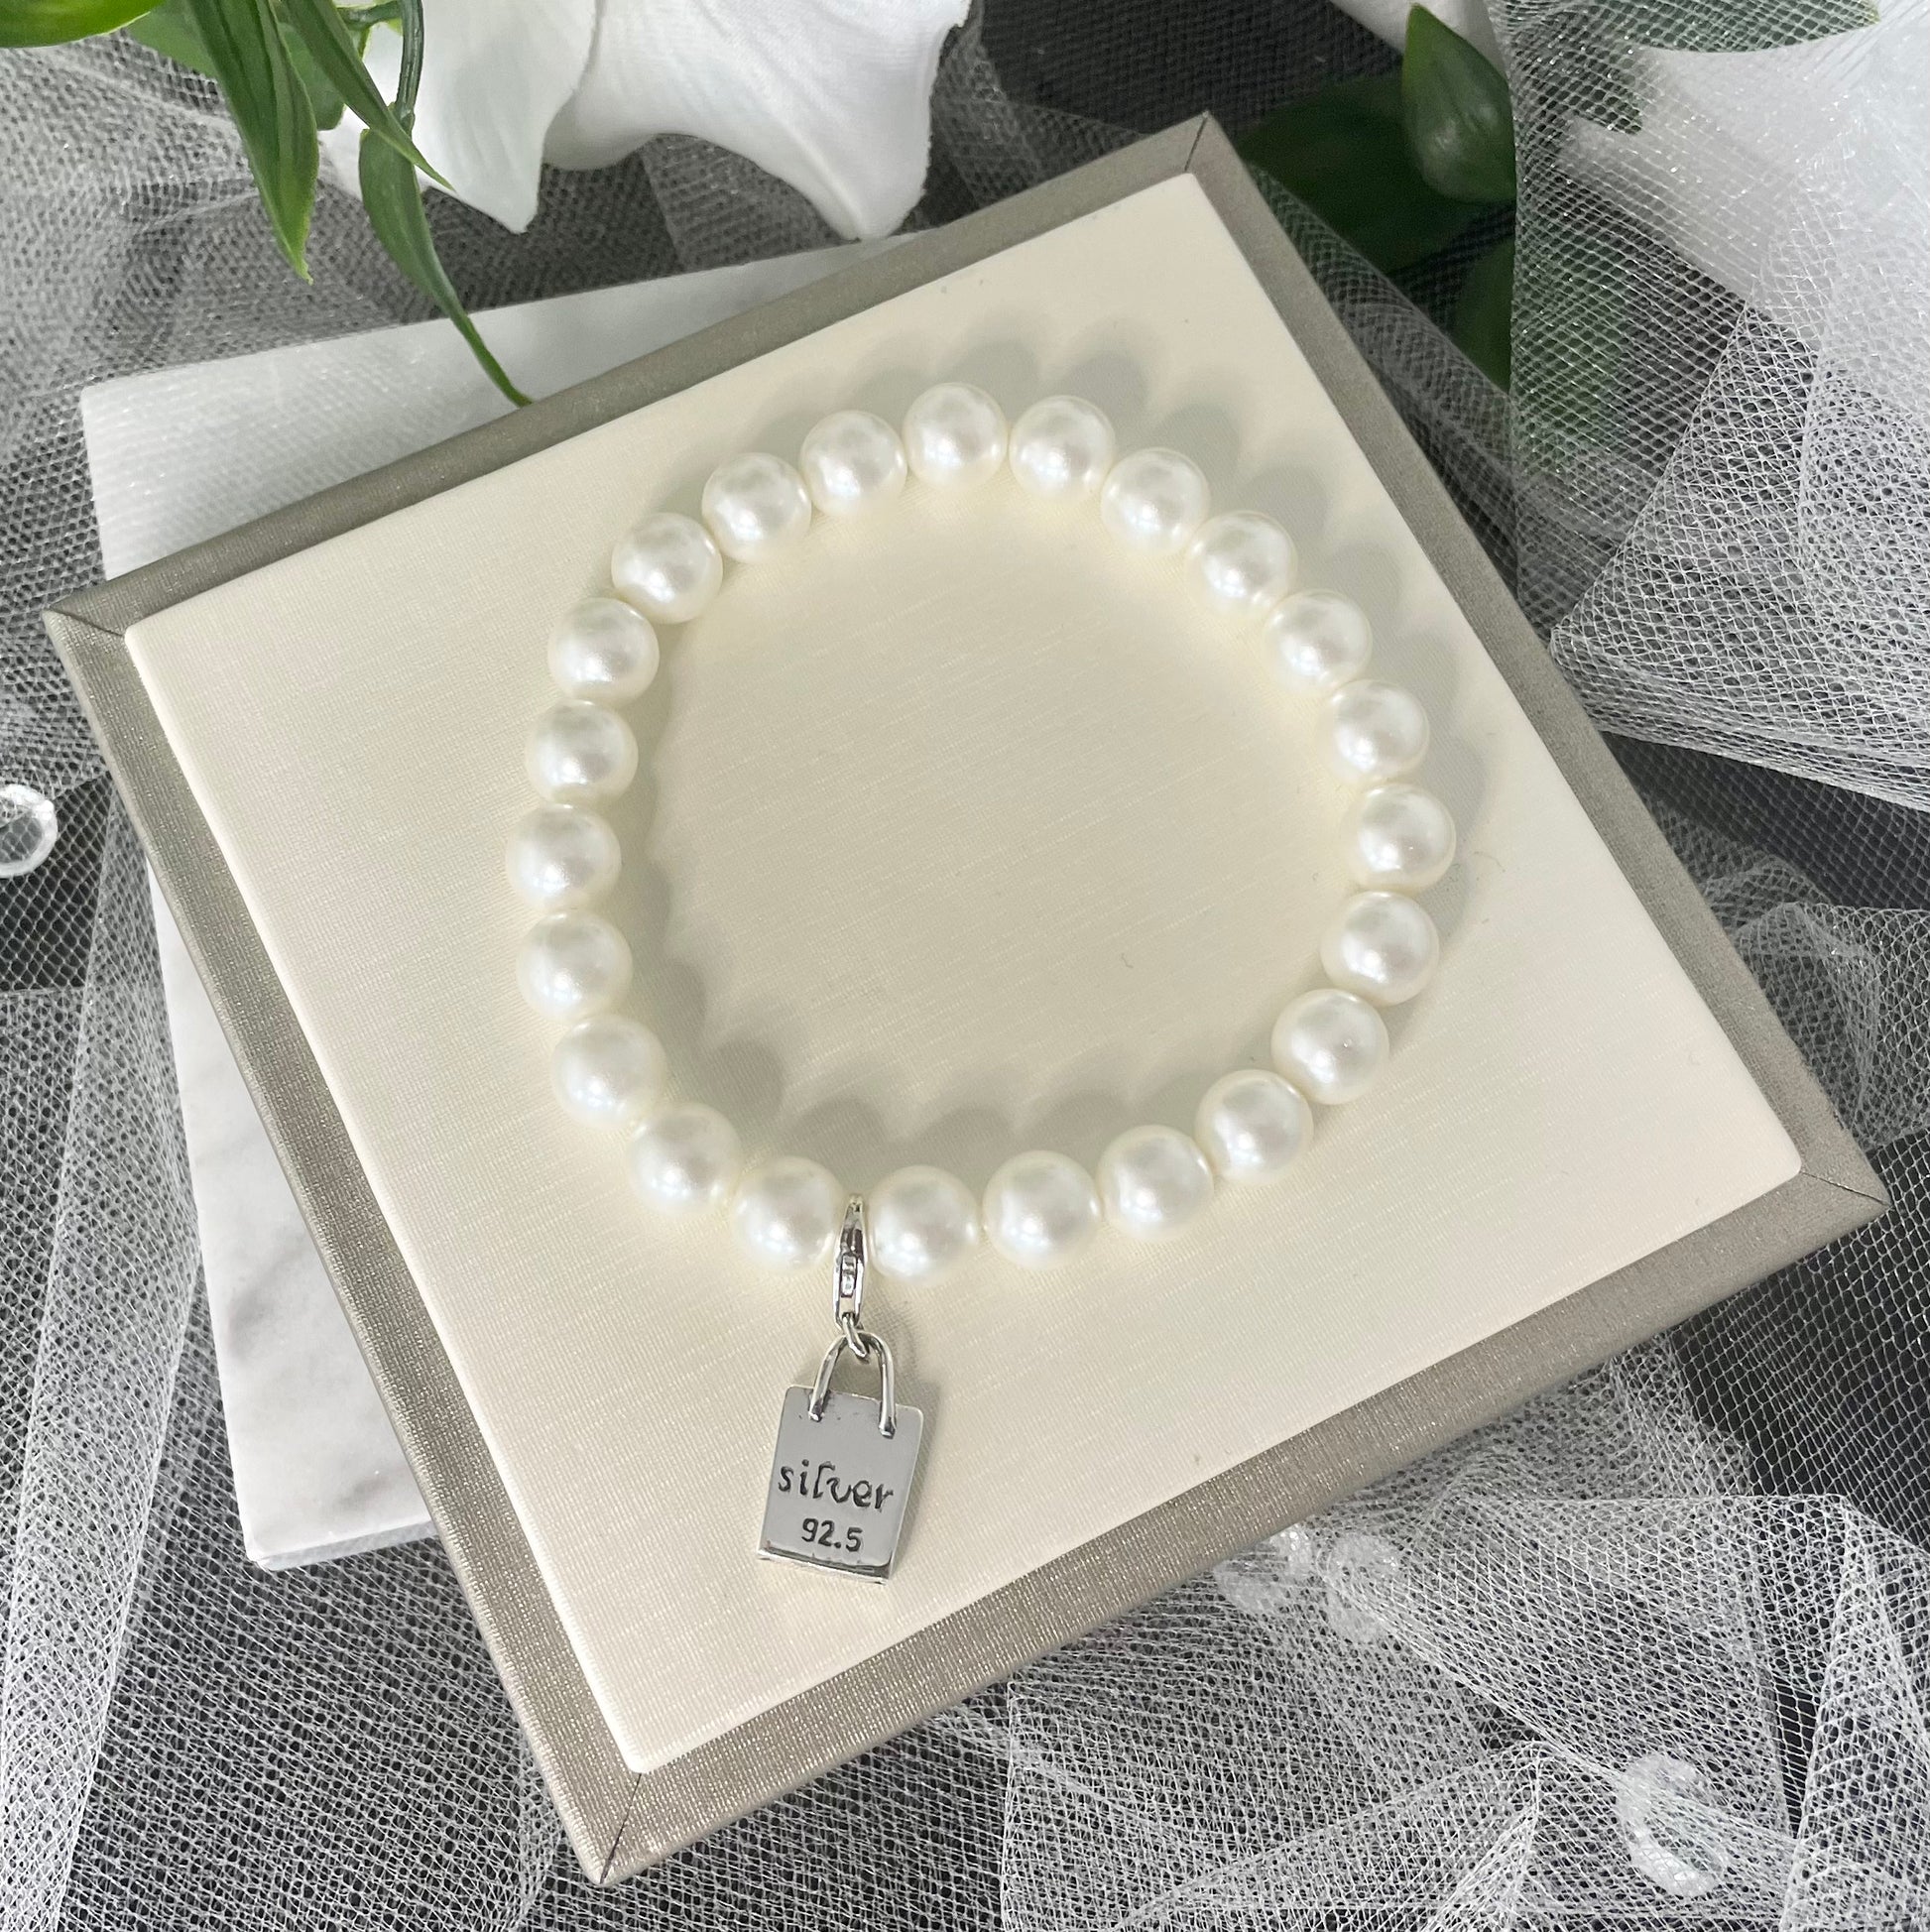 Elegant Isla Pearl Bracelet with 92.5% sterling silver design and elastic fit.